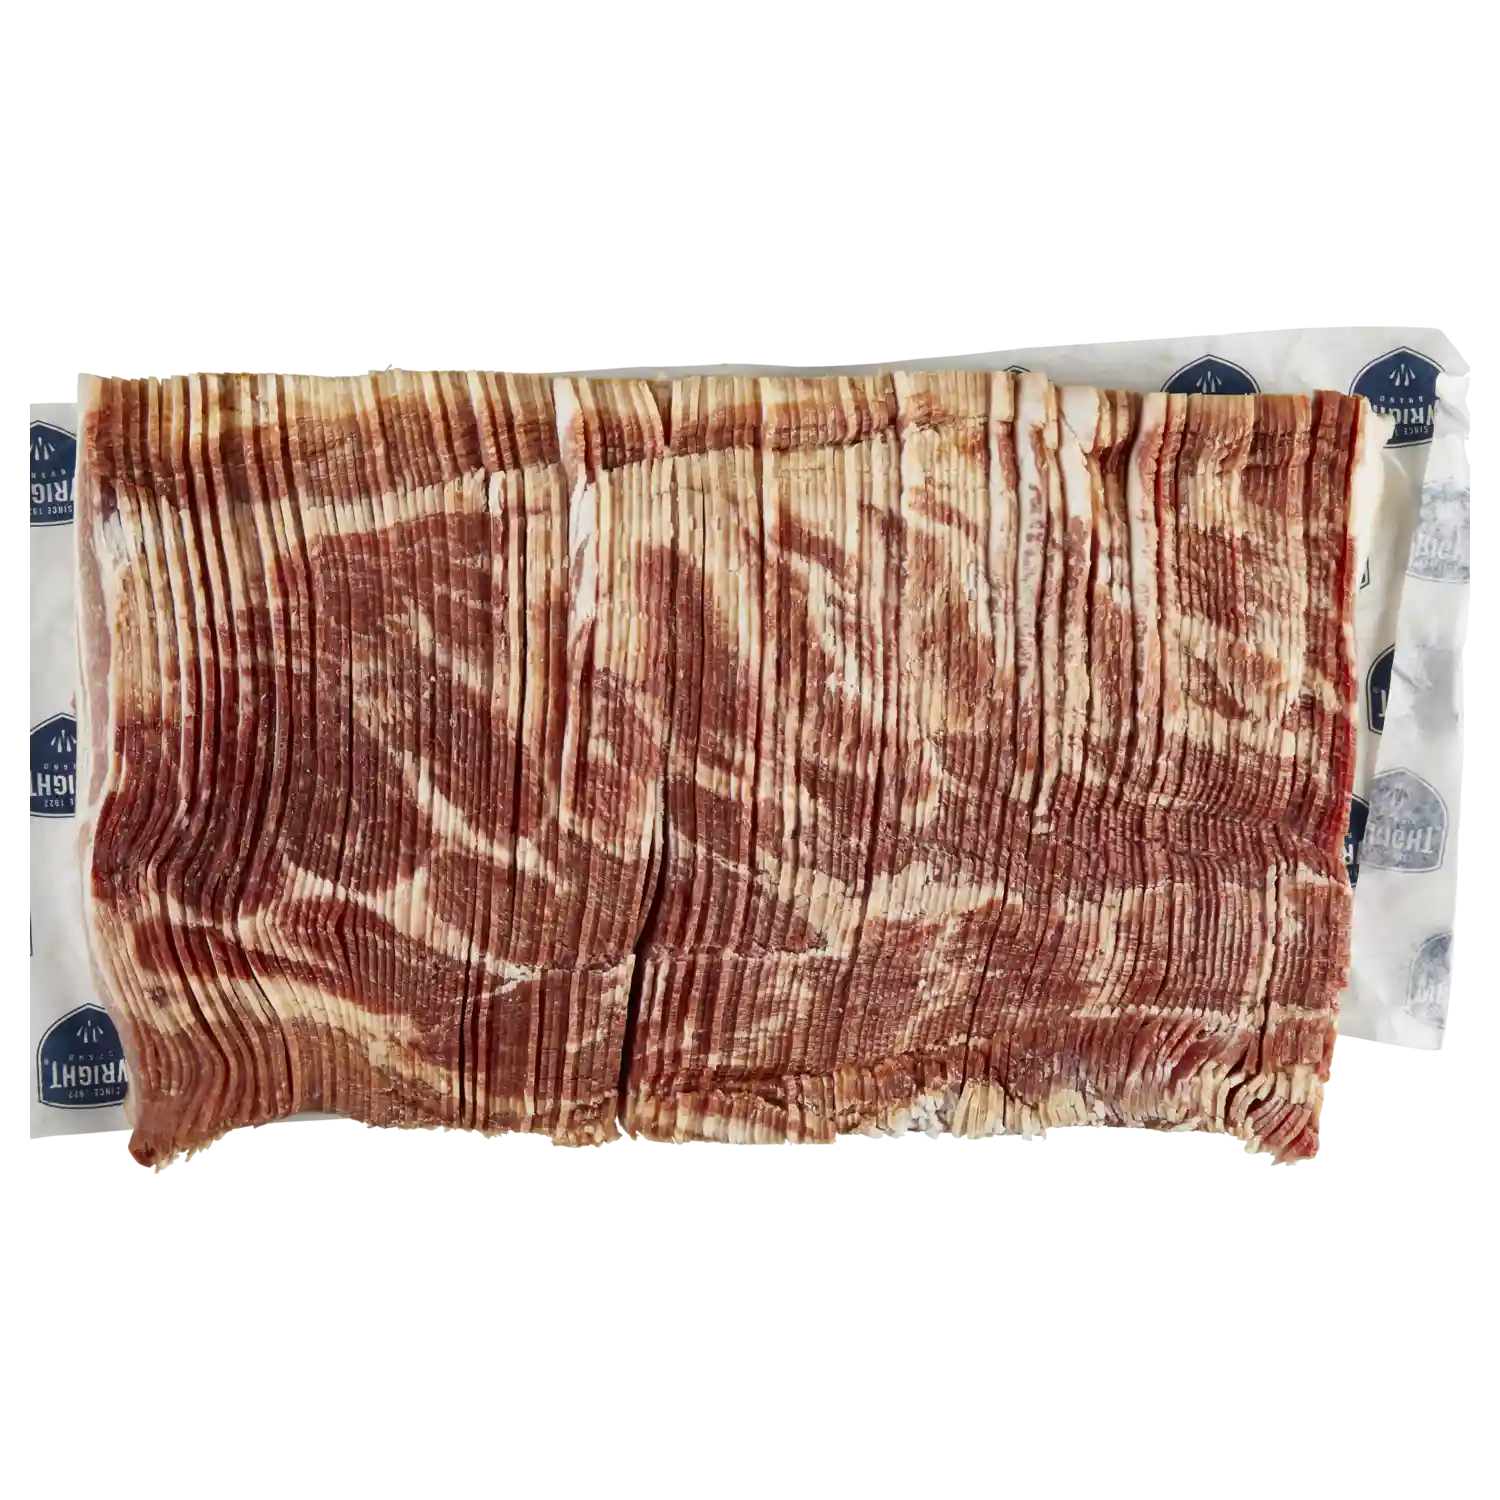 Wright® Brand Naturally Hickory Smoked Thick Sliced Bacon, Bulk, 15 Lbs, 5 Slices/Inch, Frozen_image_31